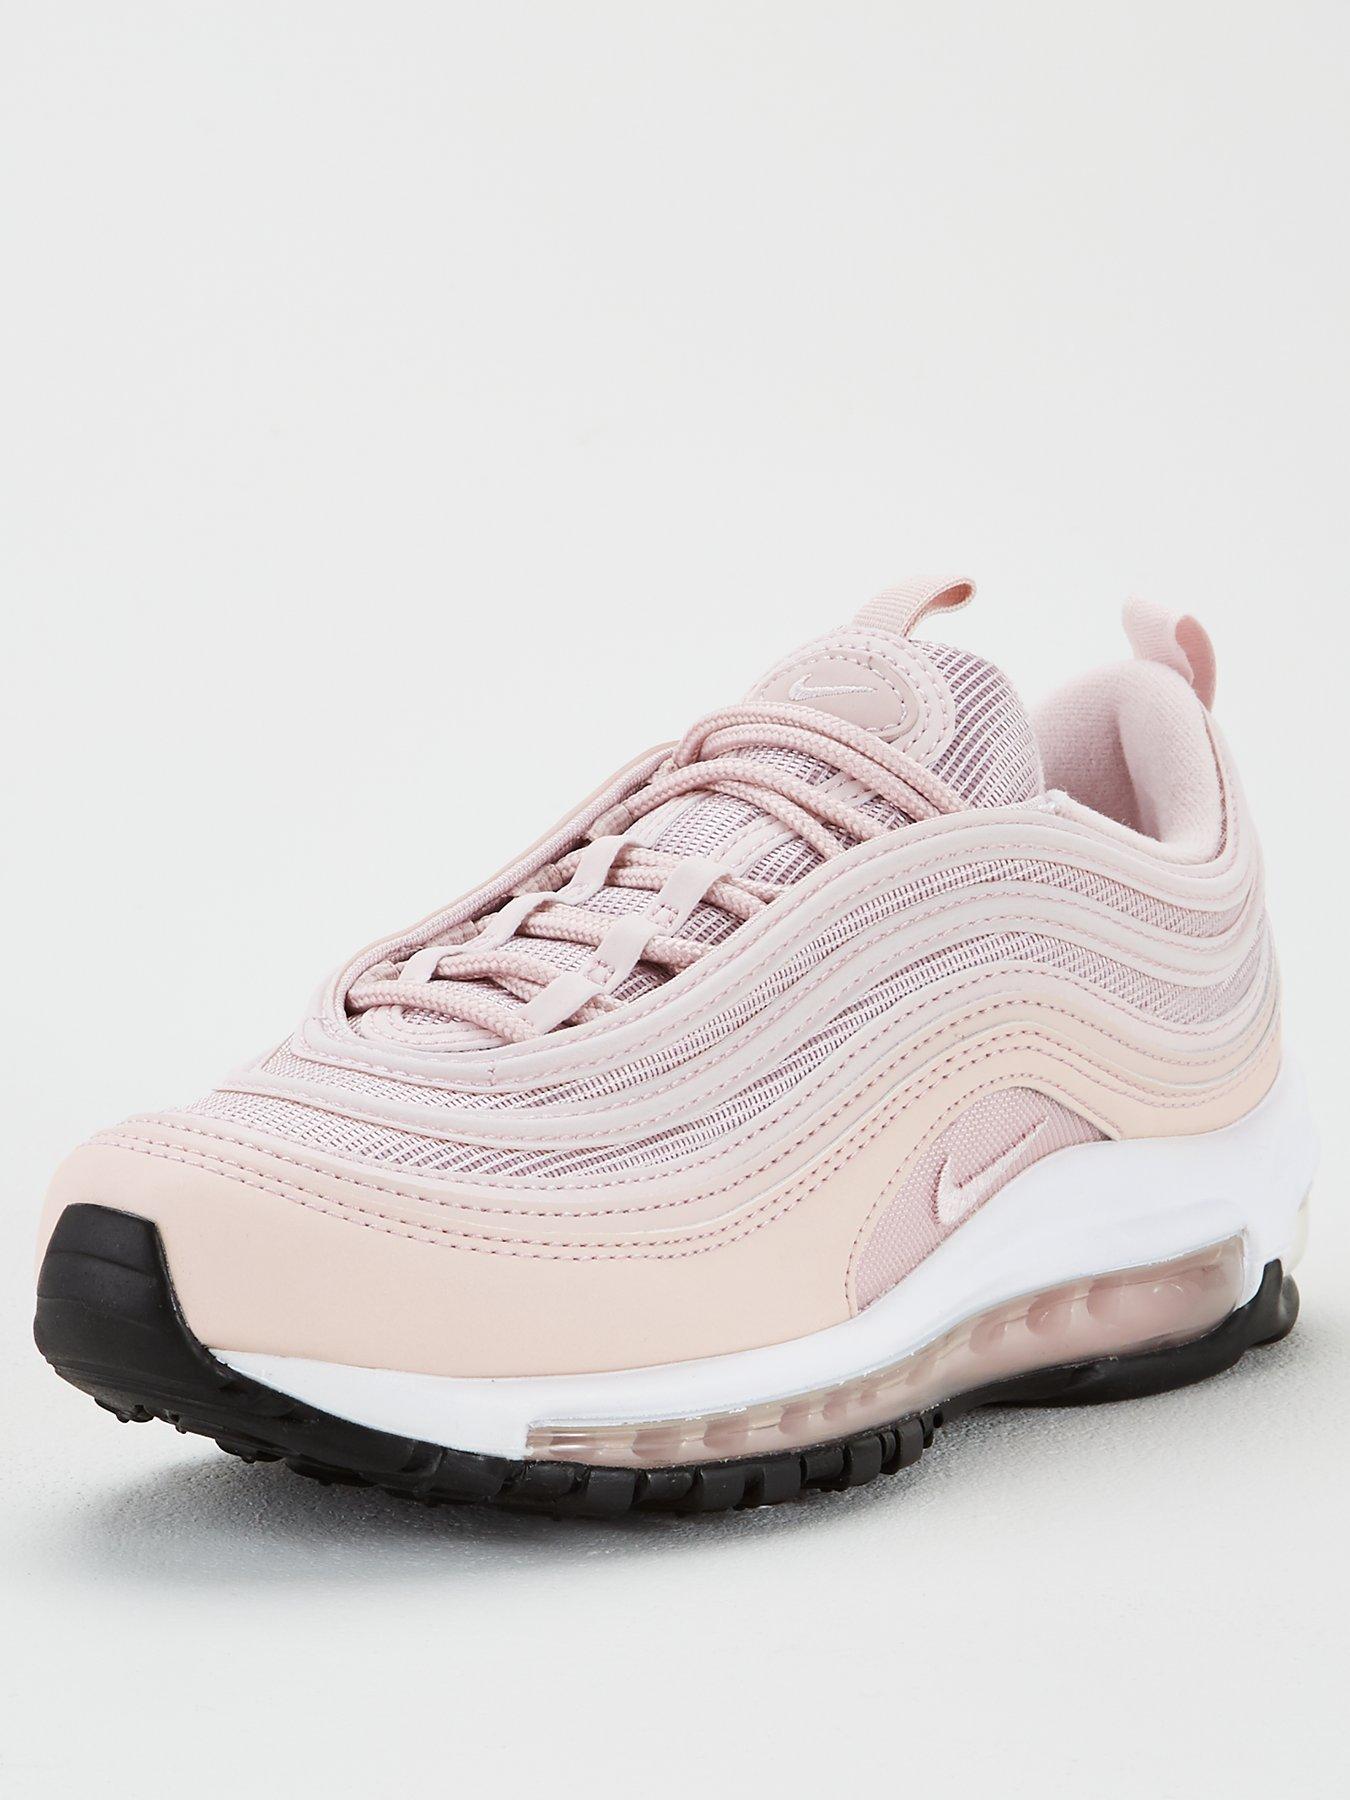 nike 97 pink and black